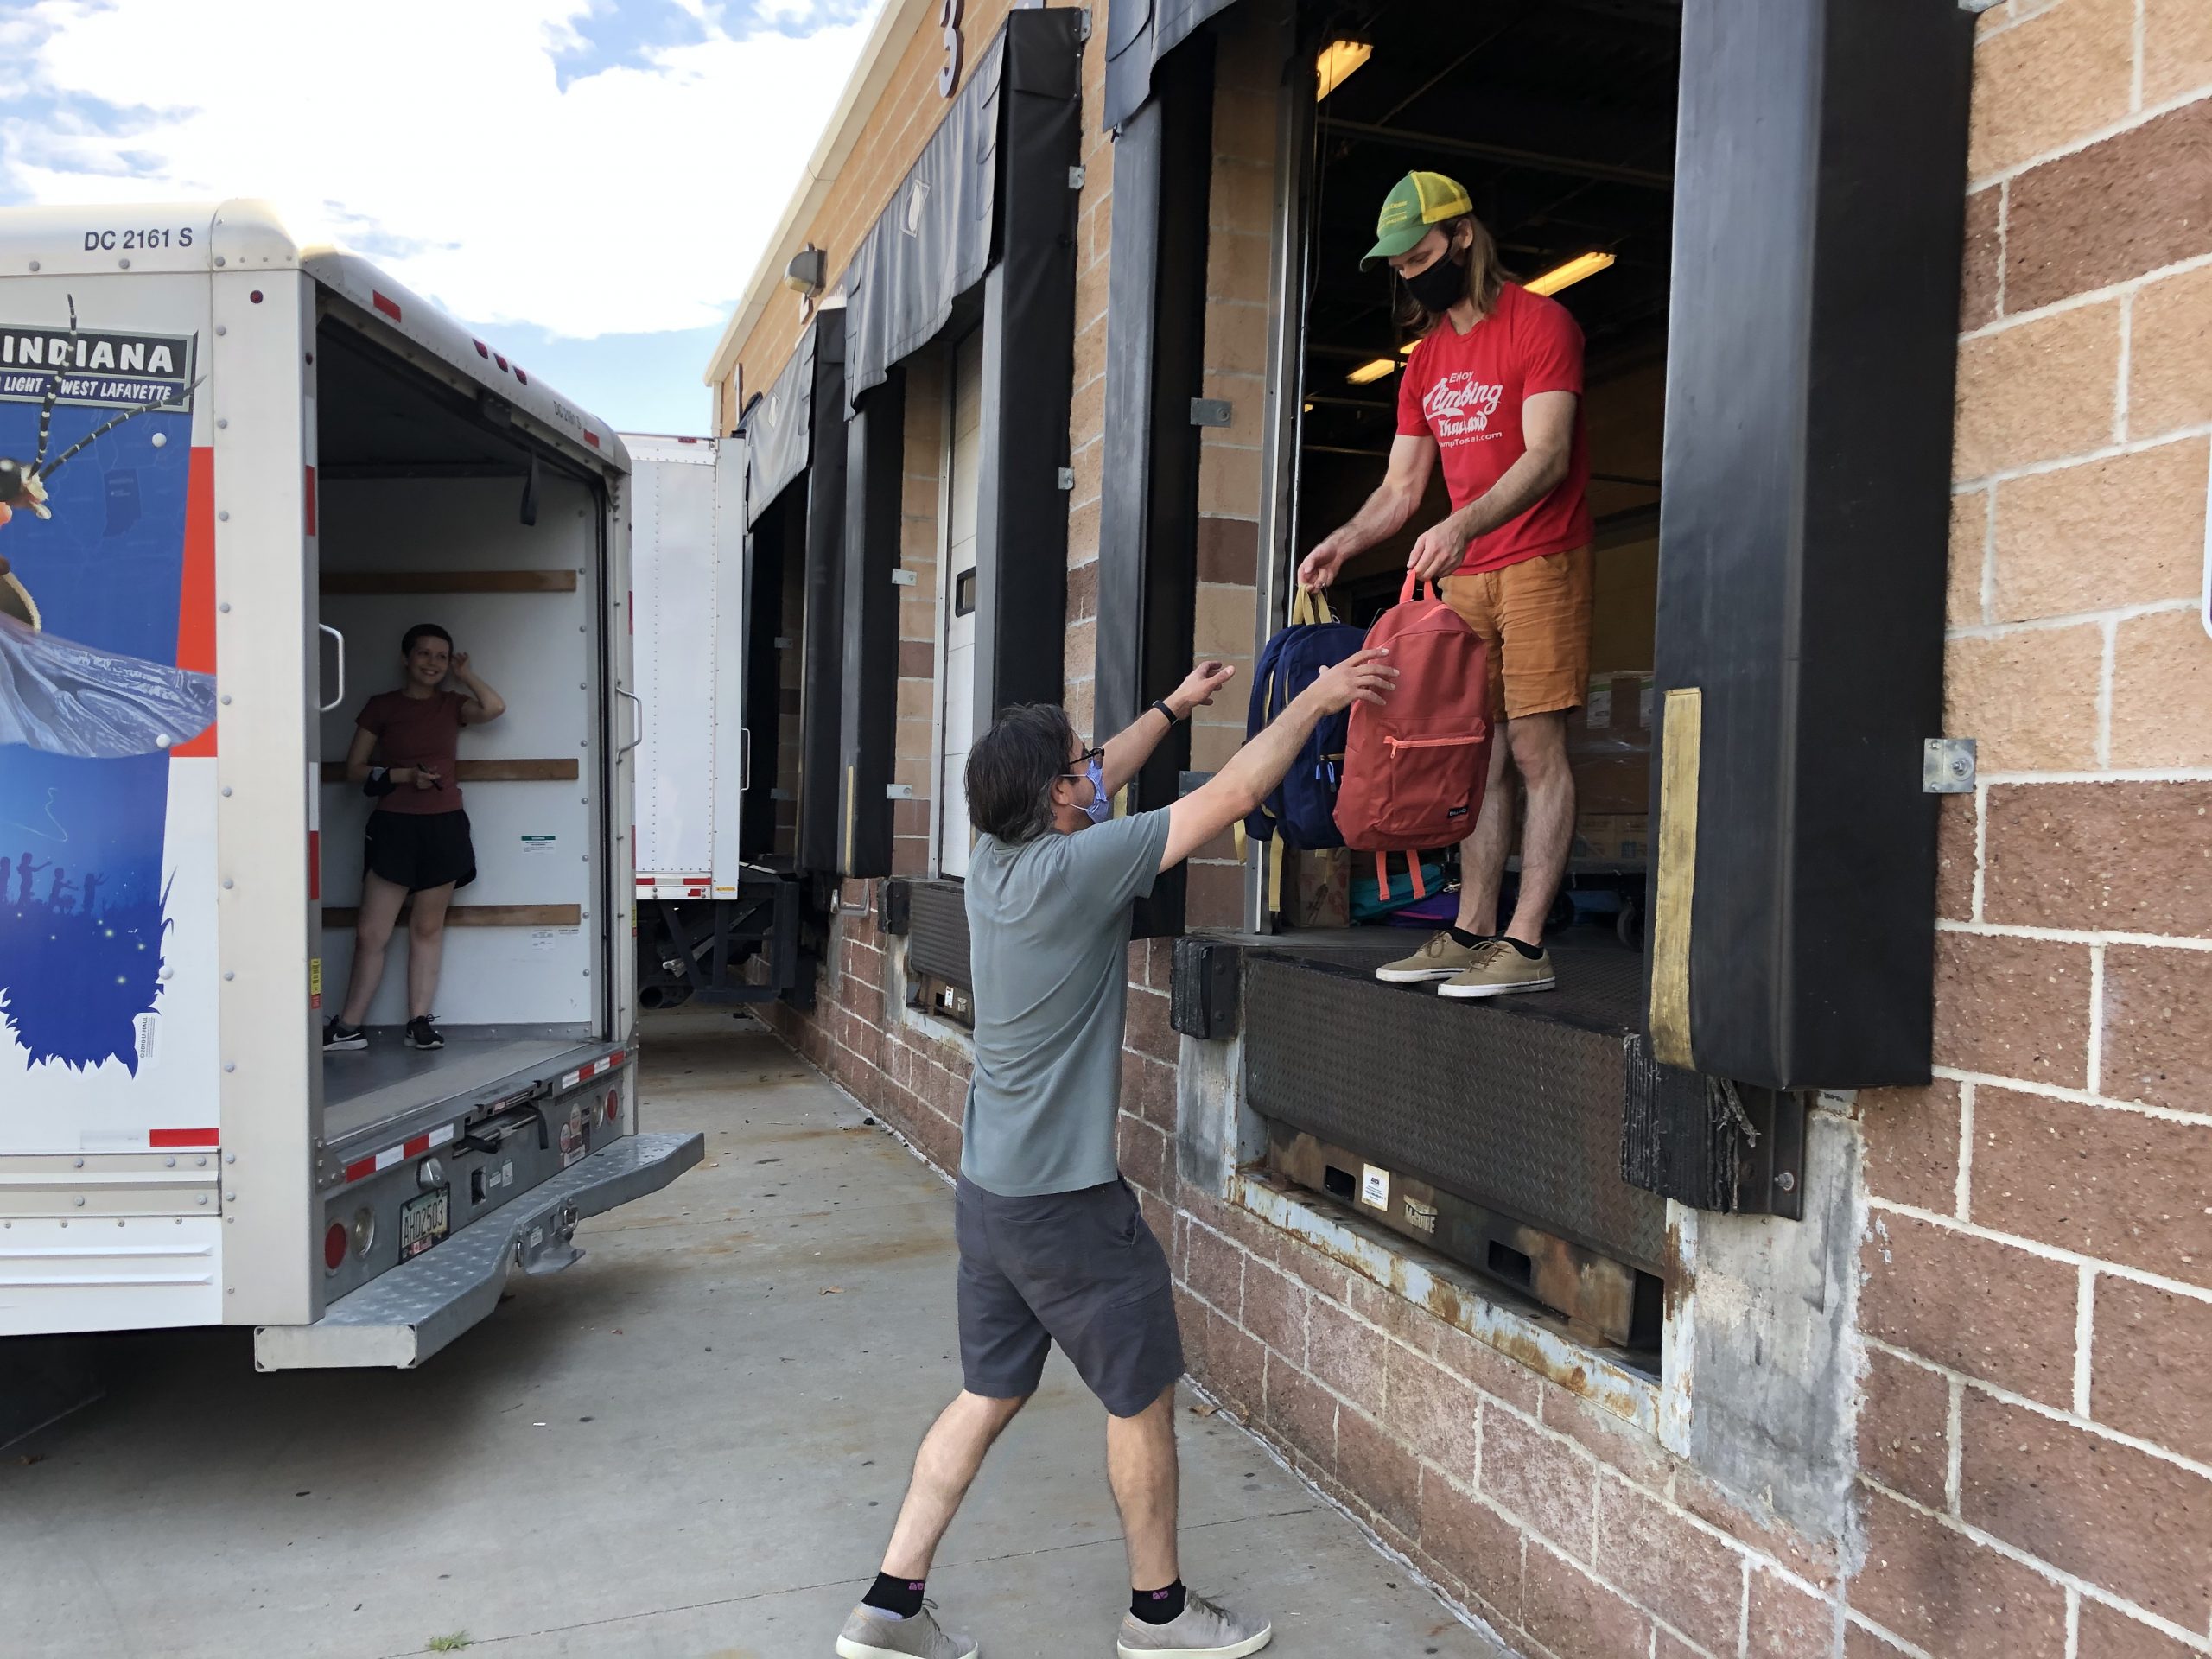 Two volunteers at the loading dock passing backpacks to be loaded into a U-Haul truck.